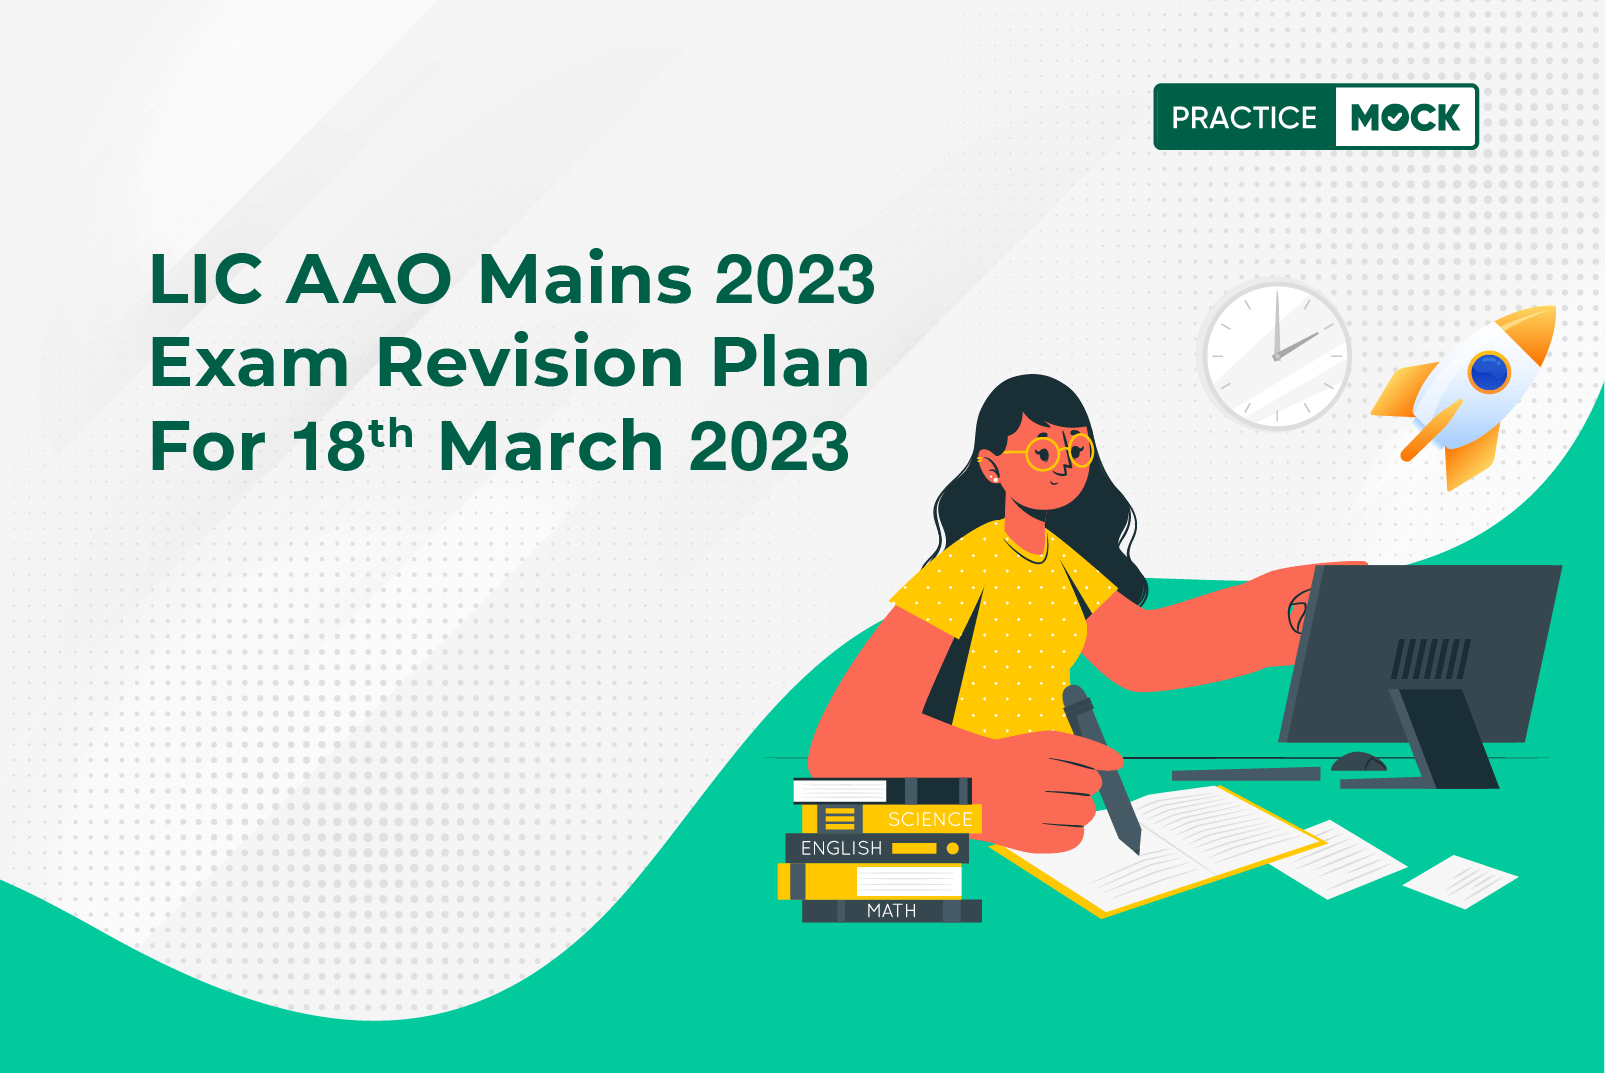 LIC AAO Mains 2023: 4-Day Revision Plan for 18th March 2023